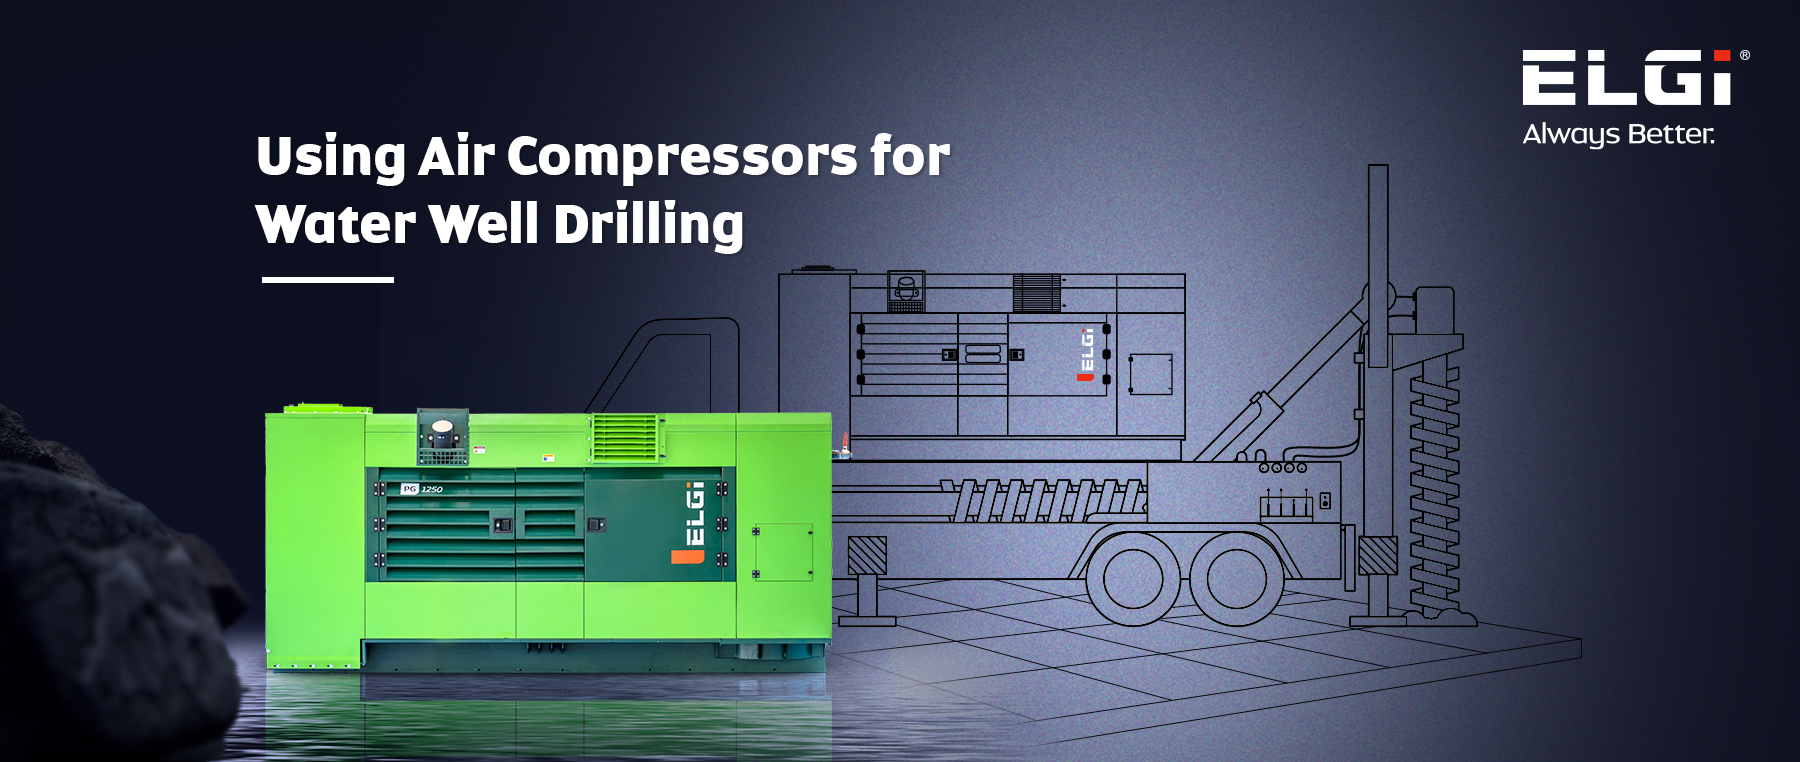 Using Air Compressors for Water Well Drilling